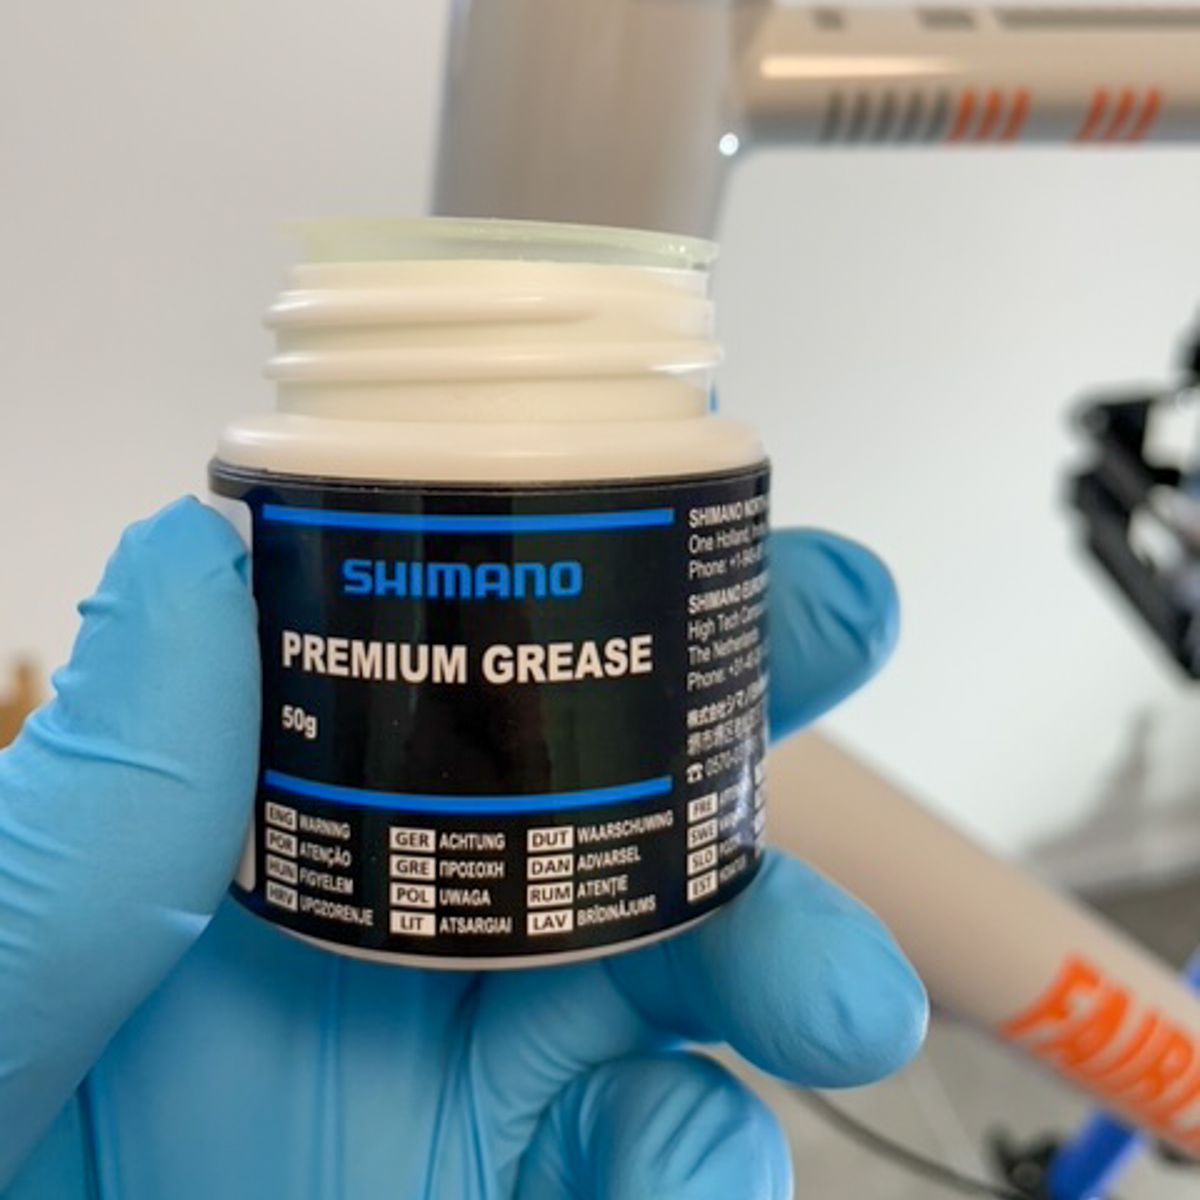 A plastic can with Shimano quality grease